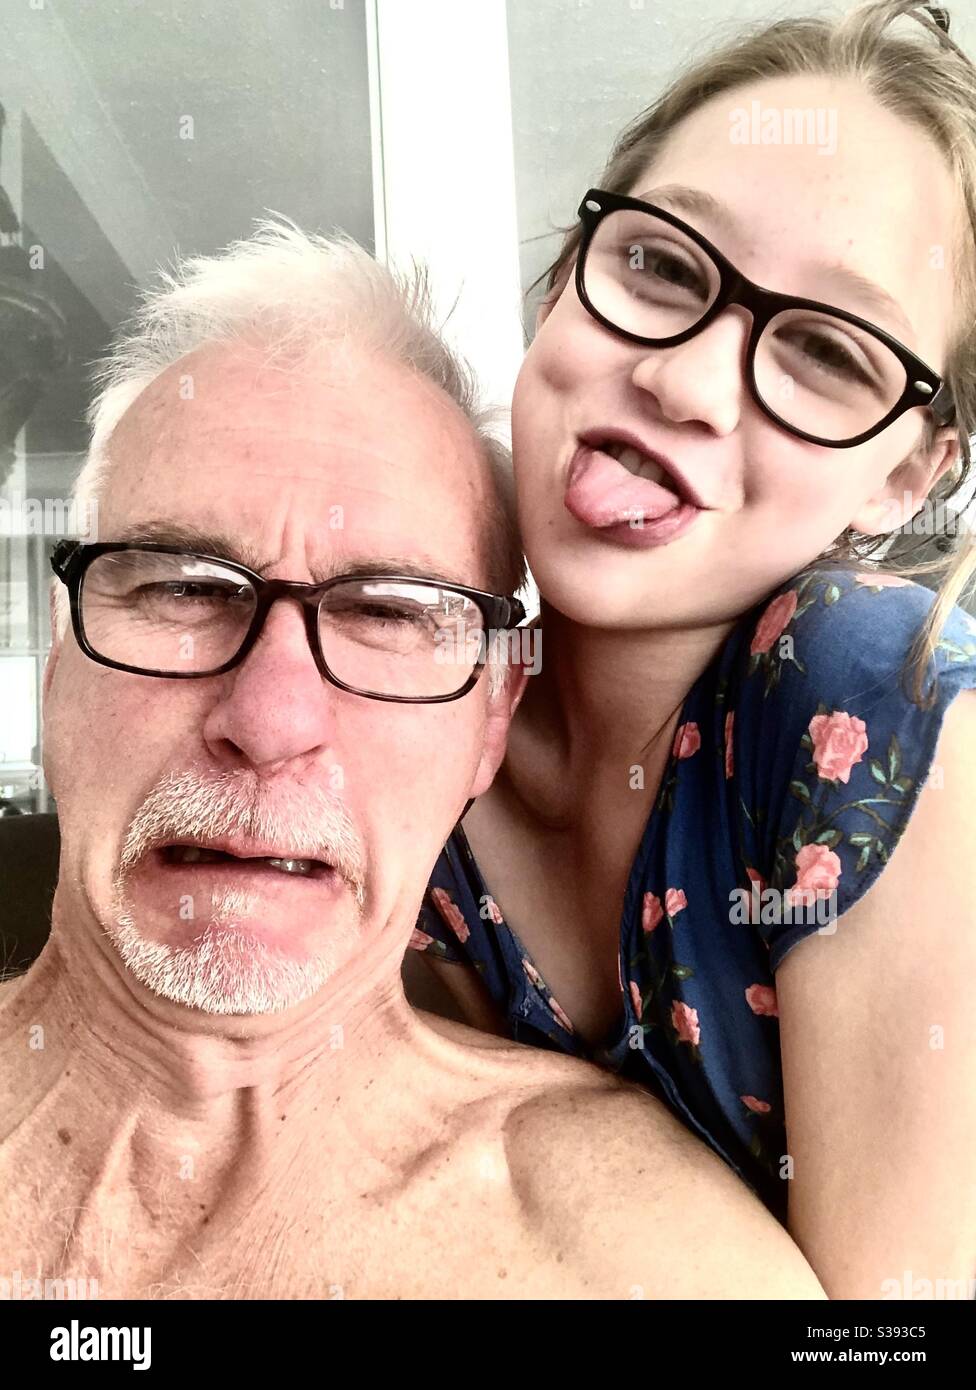 Dad and daughter doing a silly selfie Stock Photo